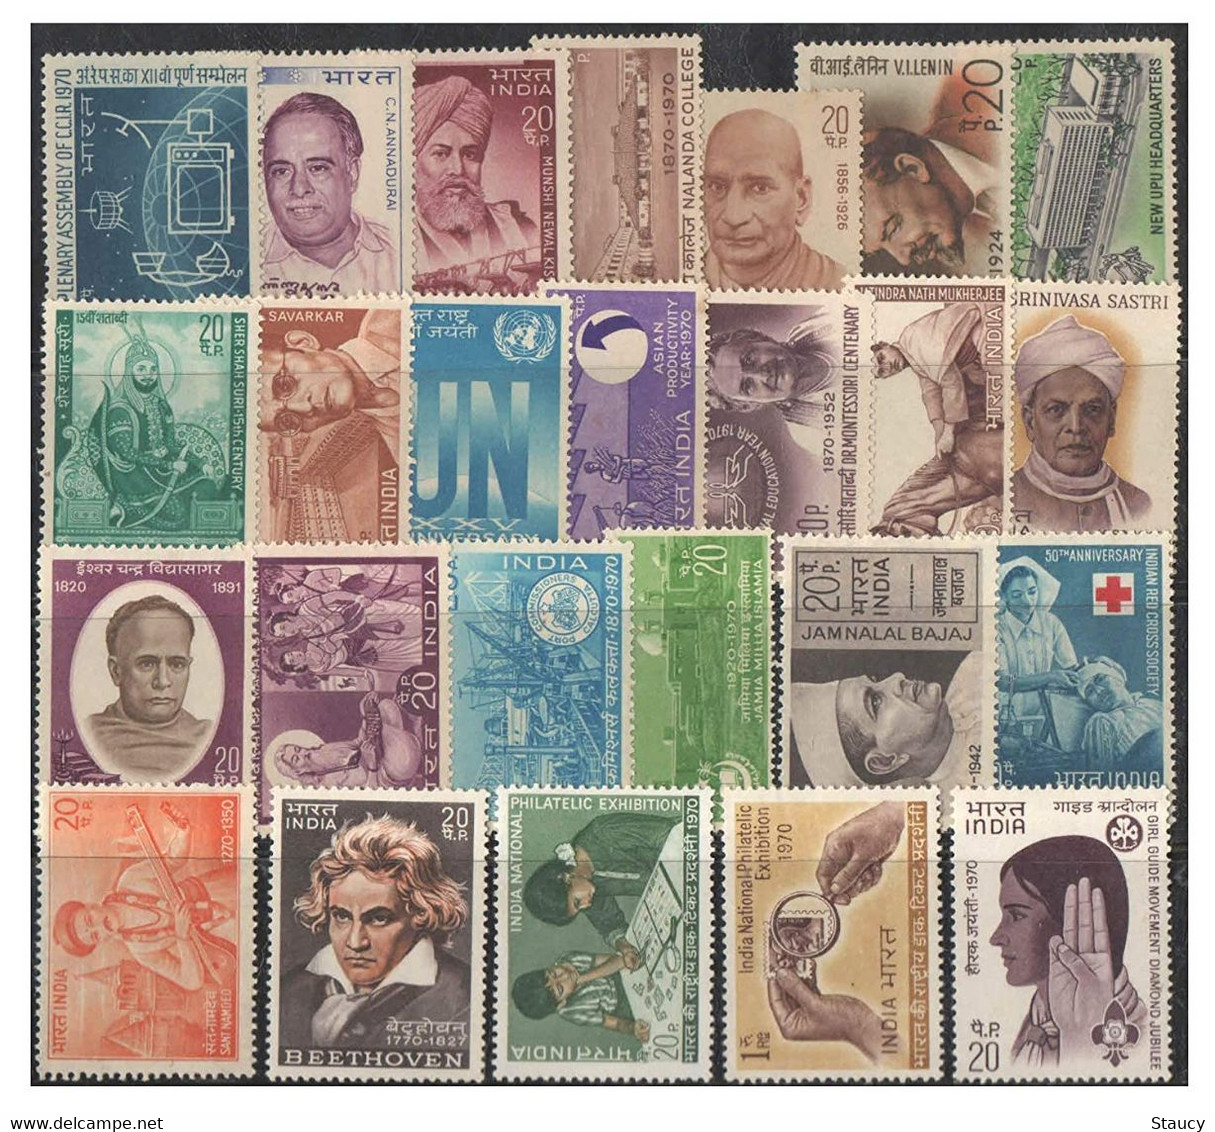 India 1970 Complete Year Pack / Set / Collection Total 25 Stamps (No Missing) MNH As Per Scan - Annate Complete